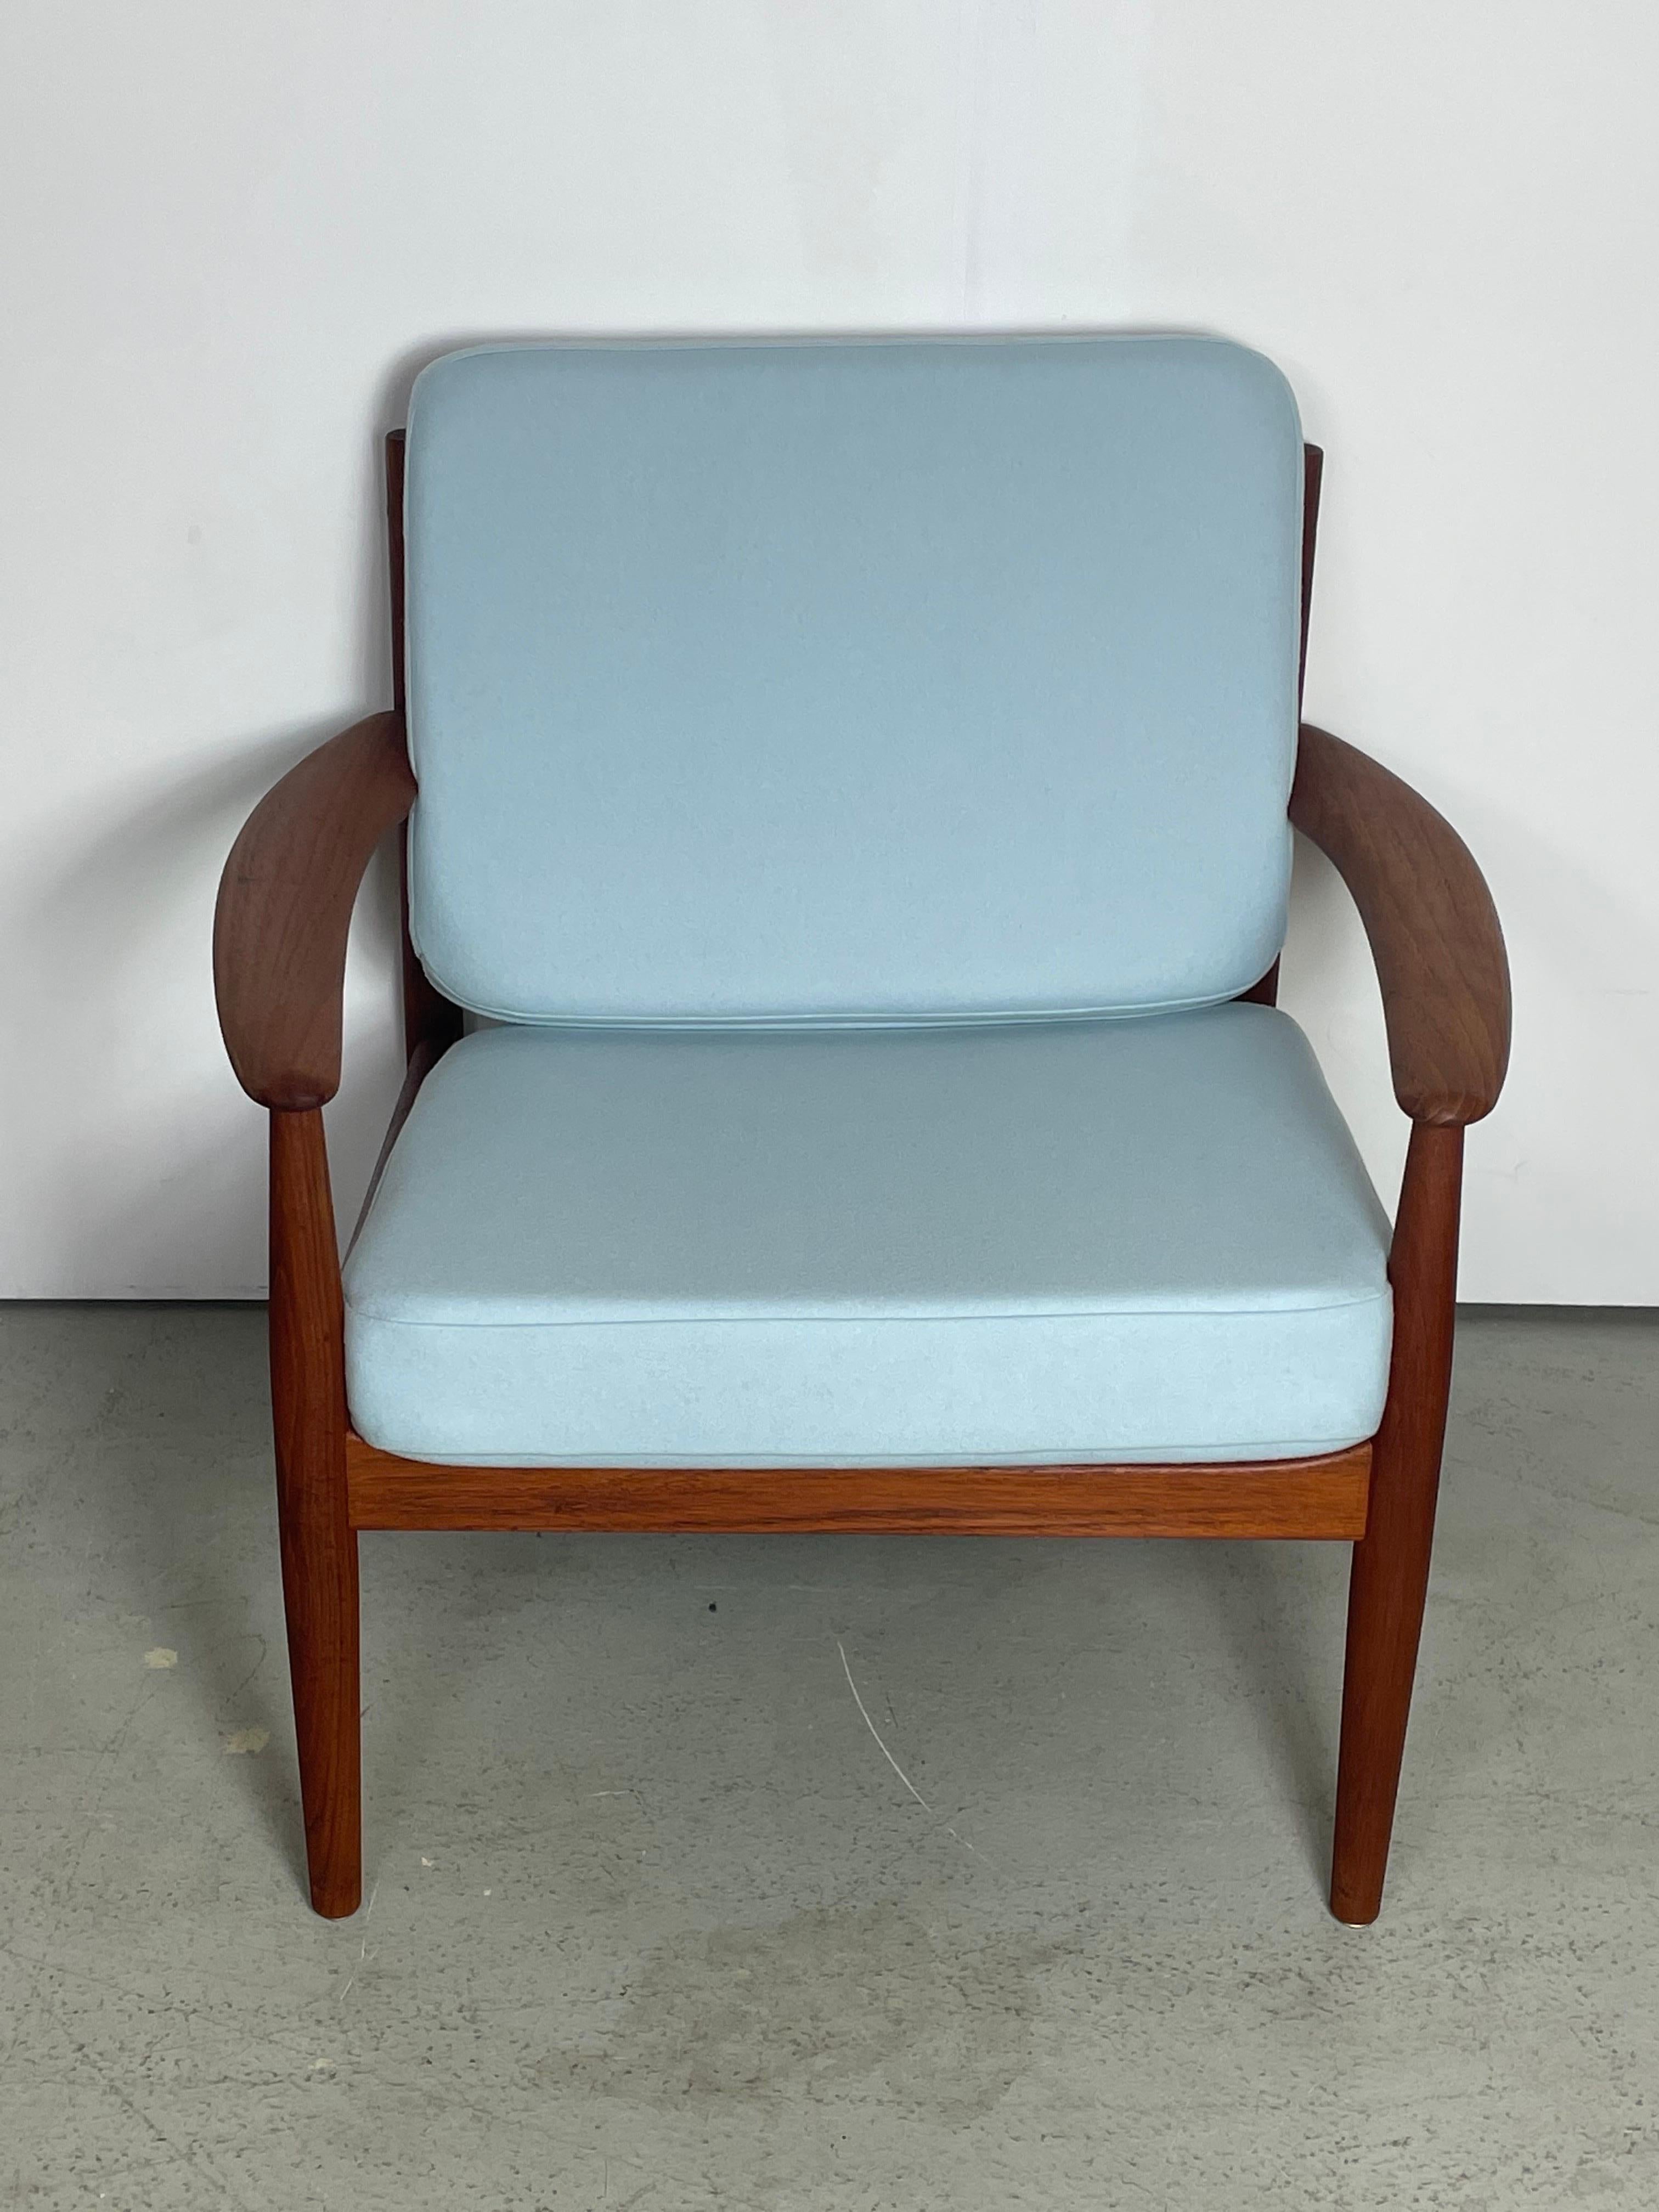 20th Century Danish Teak Easy Chair by Grete Jalk with New Upholstery For Sale